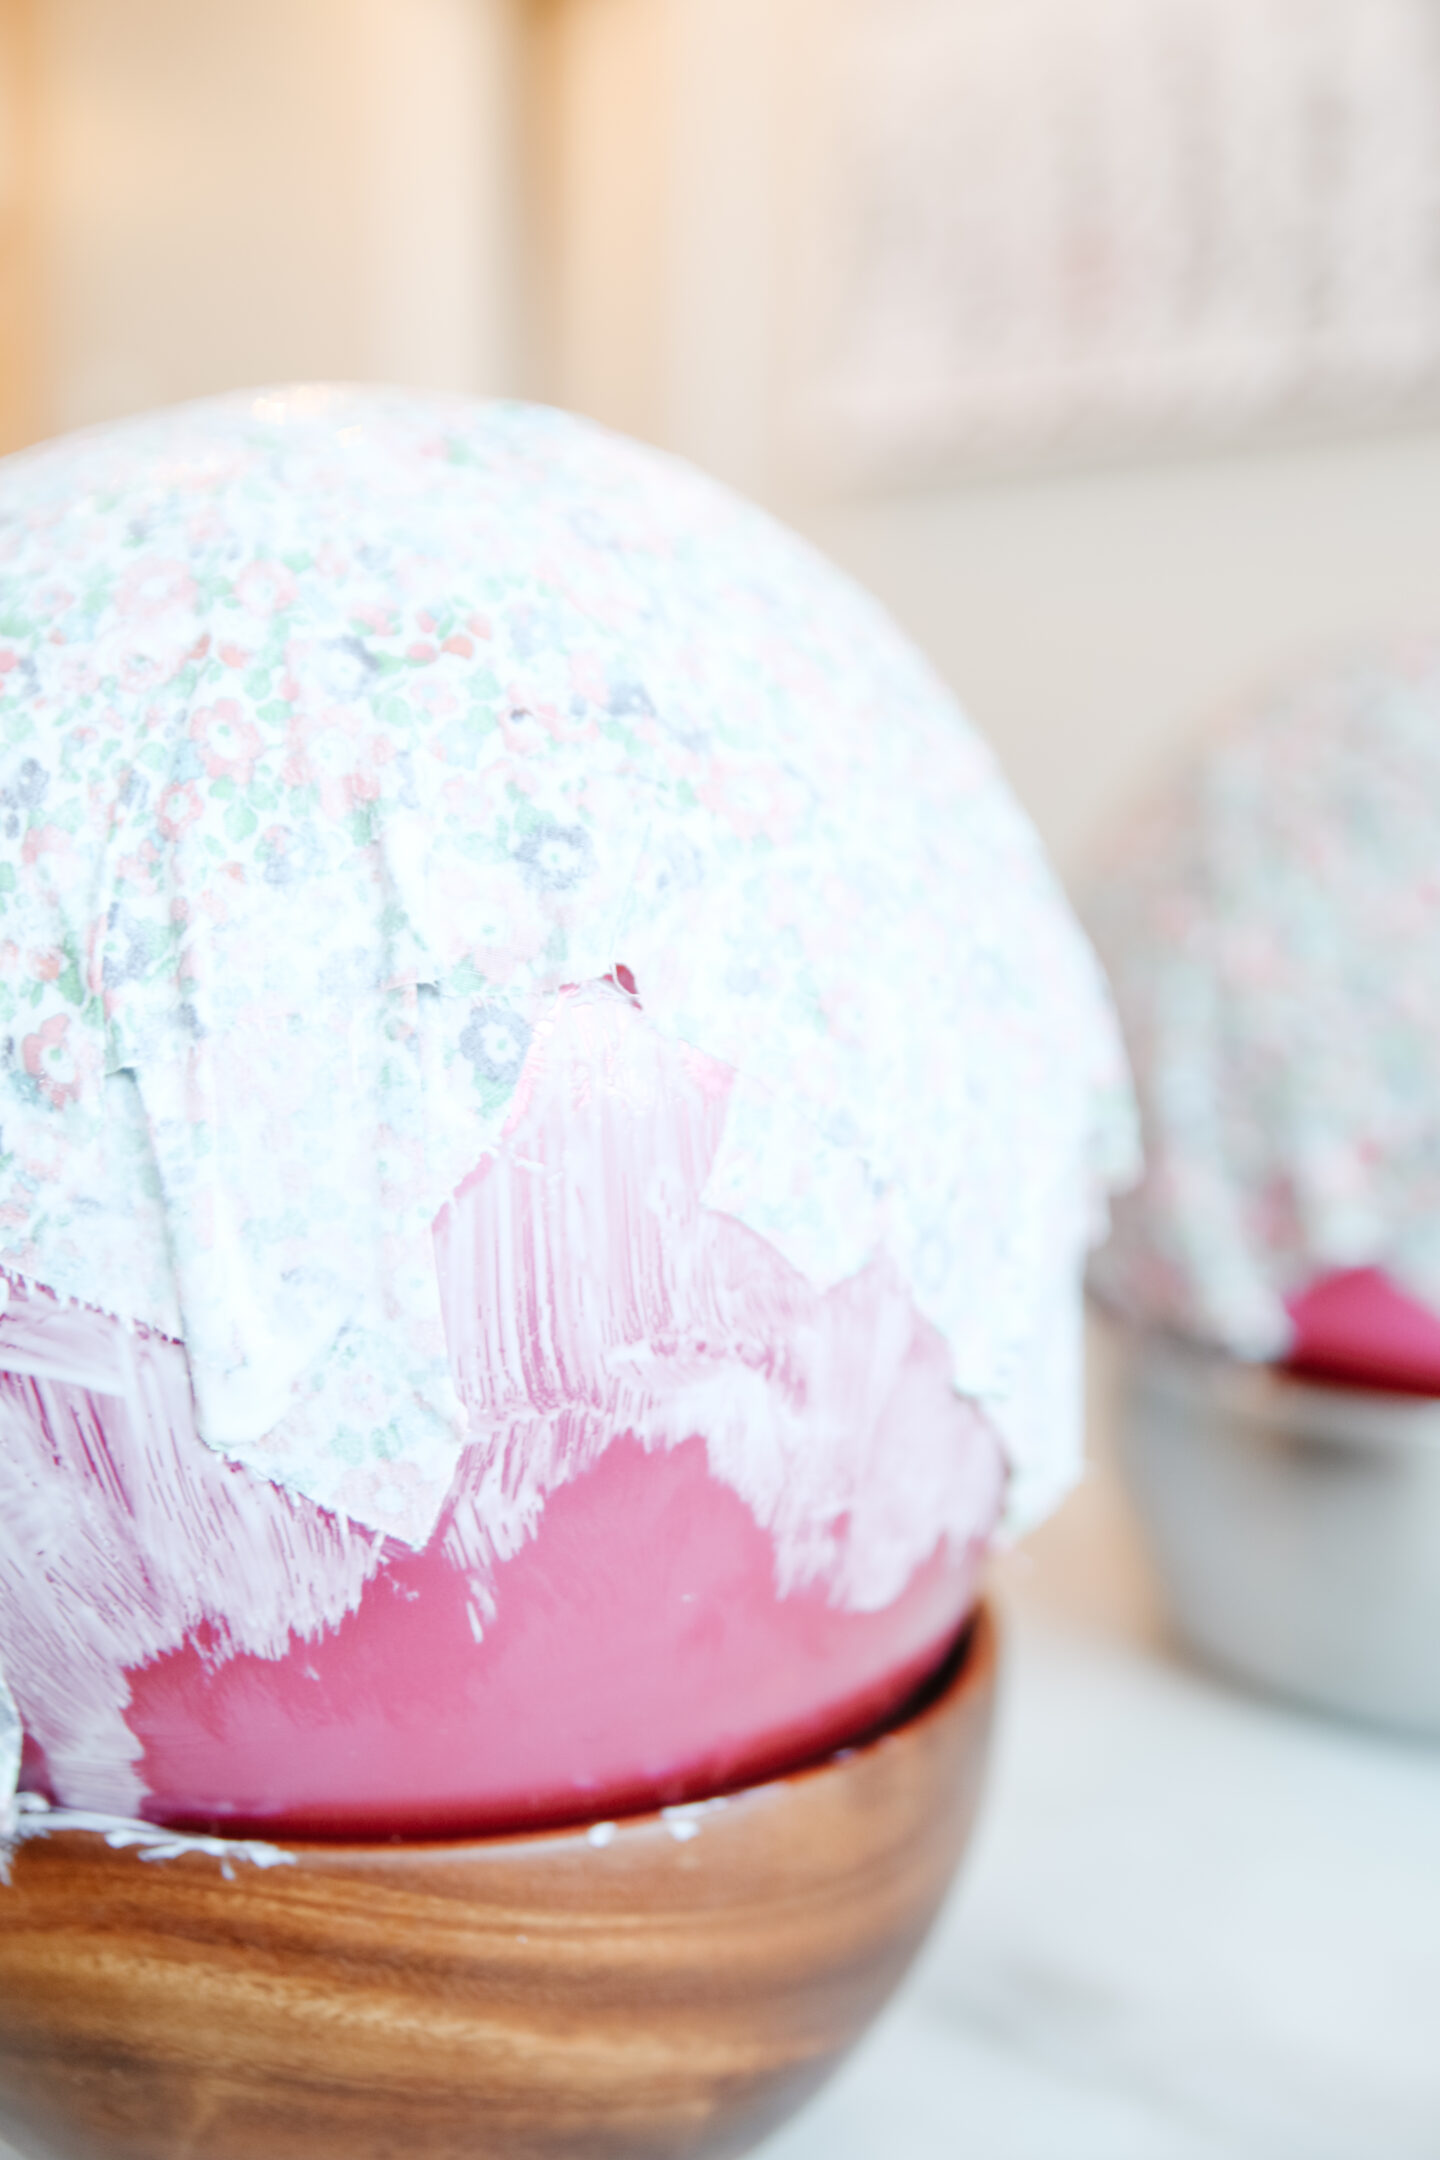 Let's Learn How to Papier-Mâché With Fabric & Make The Prettiest